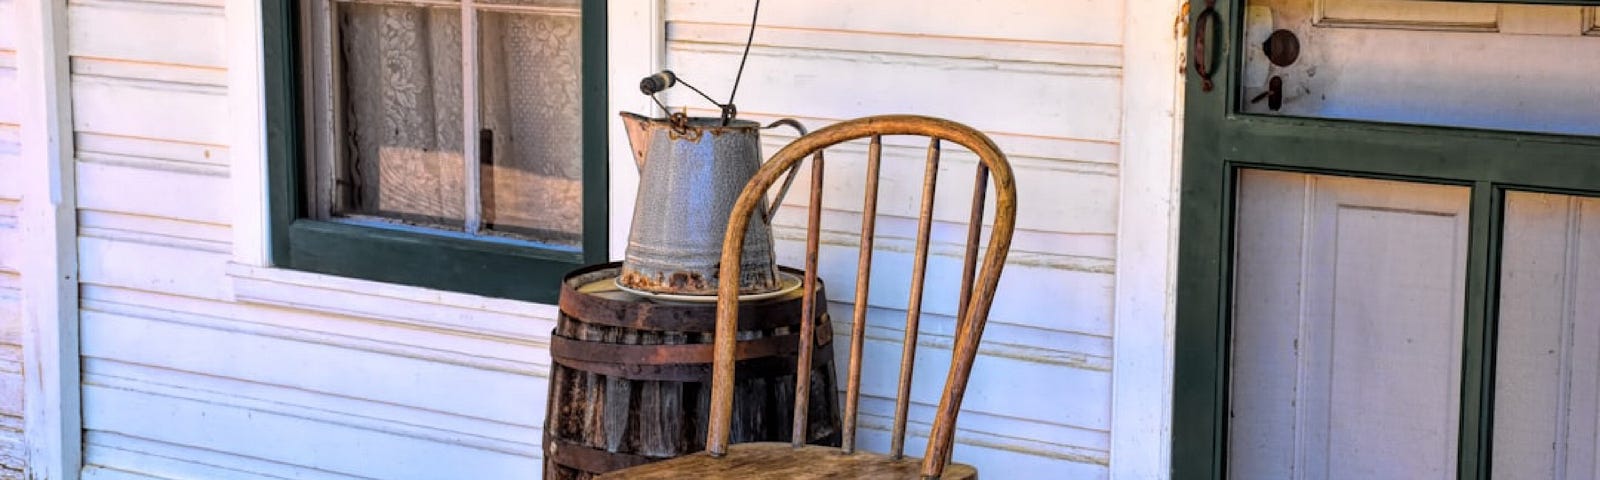 Old House, wood porch, with a wooden chair sitting empty and a barrel beside the chair, a peaceful image.